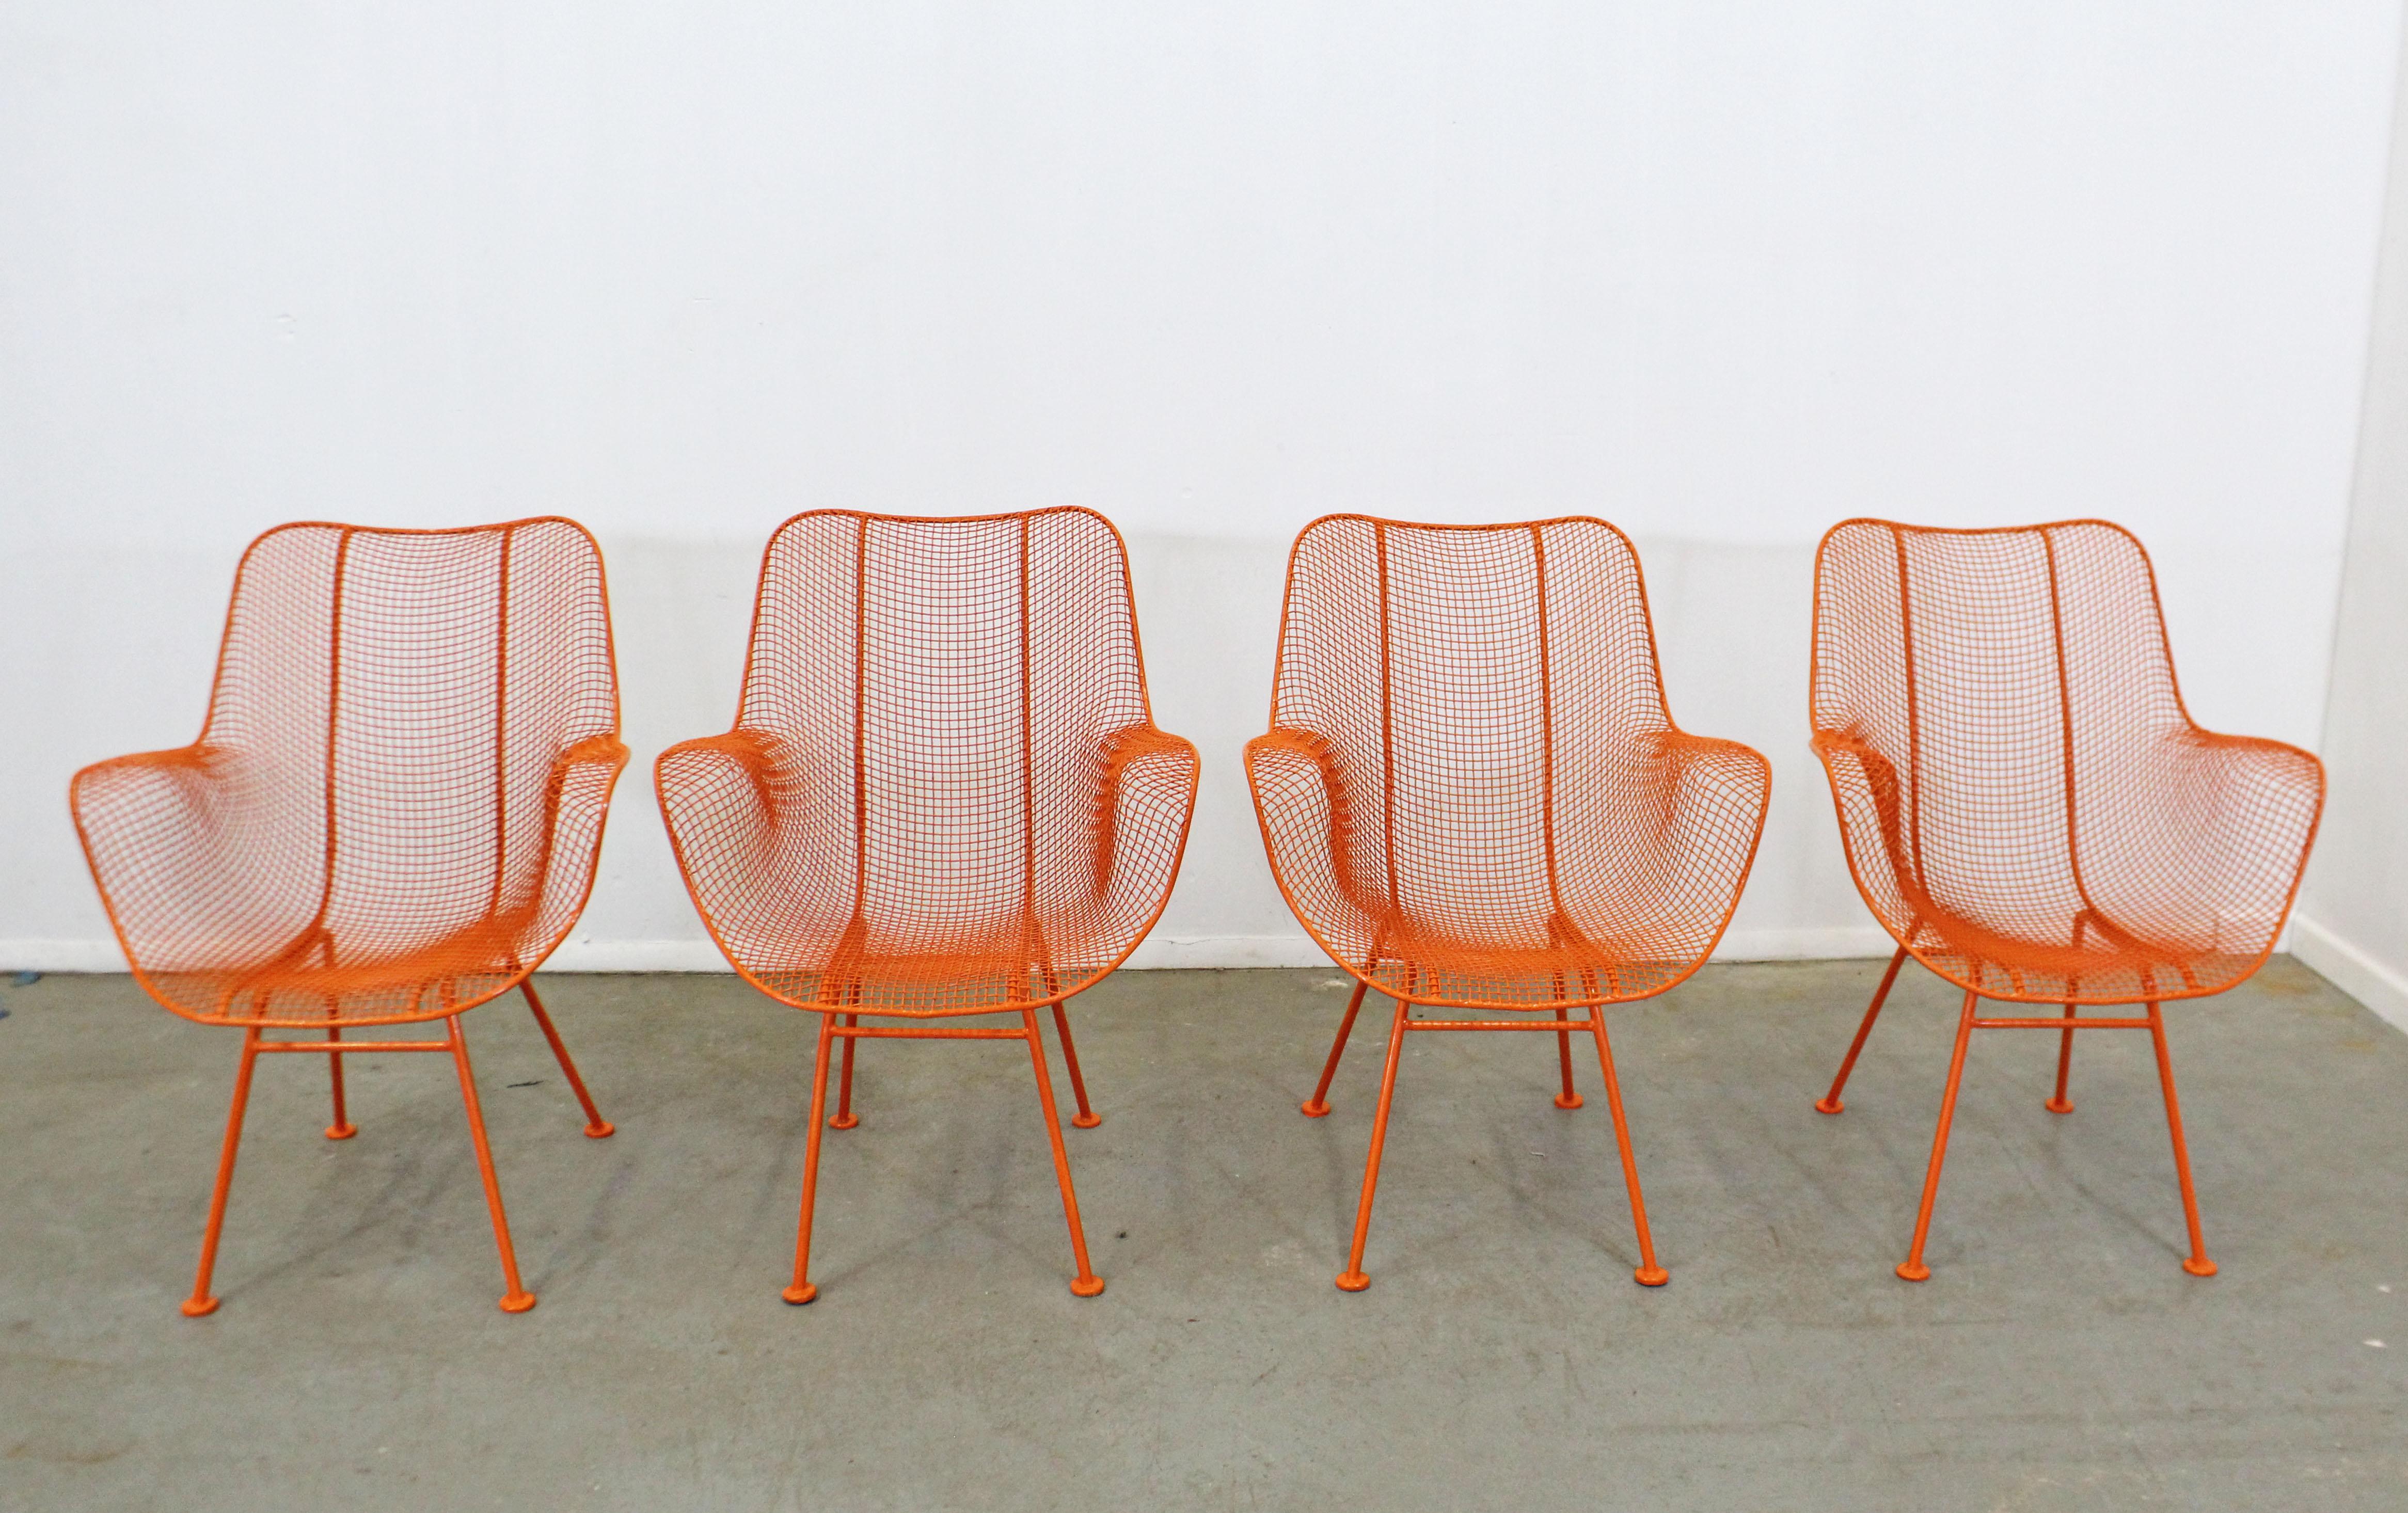 What a find. Offered is a set of 4 Mid-Century Modern outdoor armchairs designed by John Woodard, circa 1956 for the 'Sculptura' line. Features enameled and woven wrought iron. The chairs are structurally sound in very good condition with orange